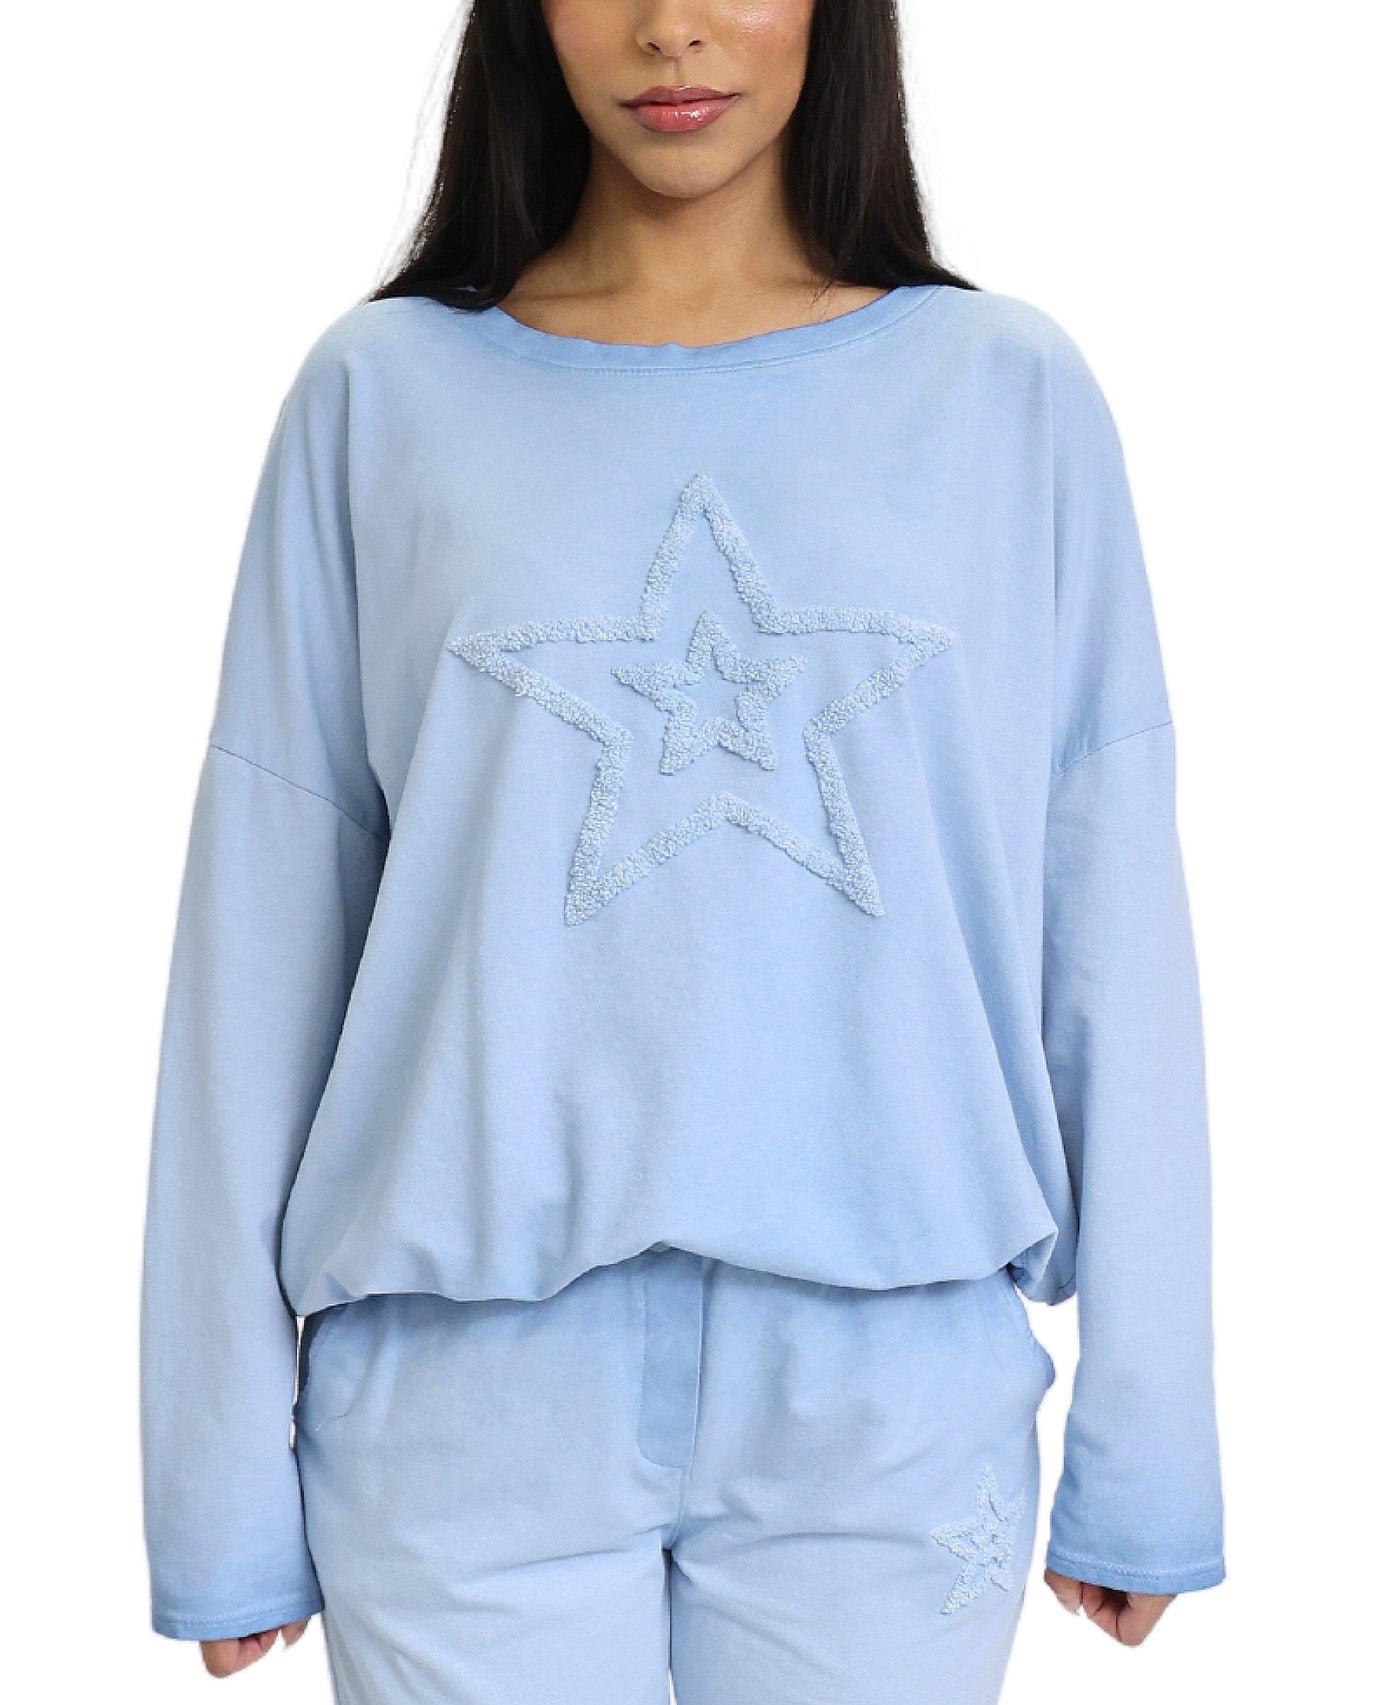 Top w/ Frayed Star image 1